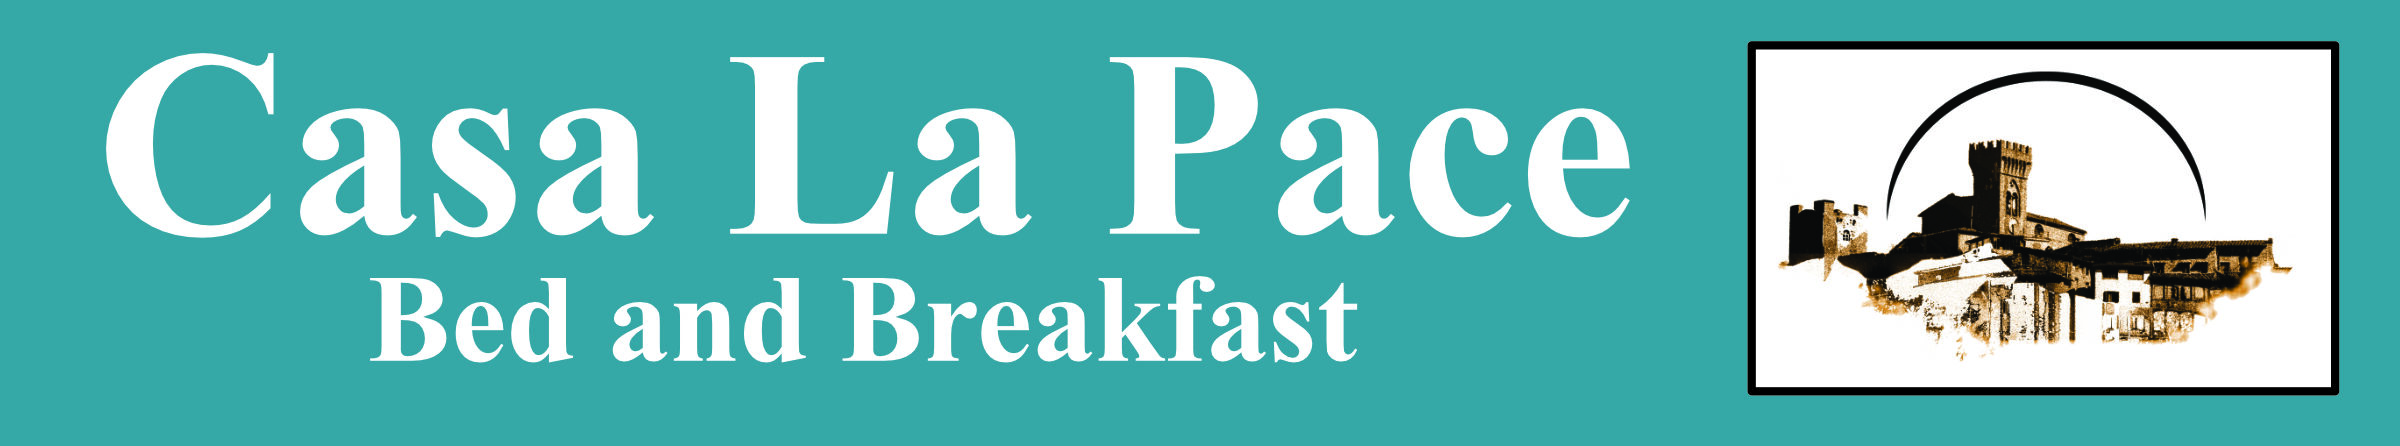 Casa la Pace Bed and Breakfast